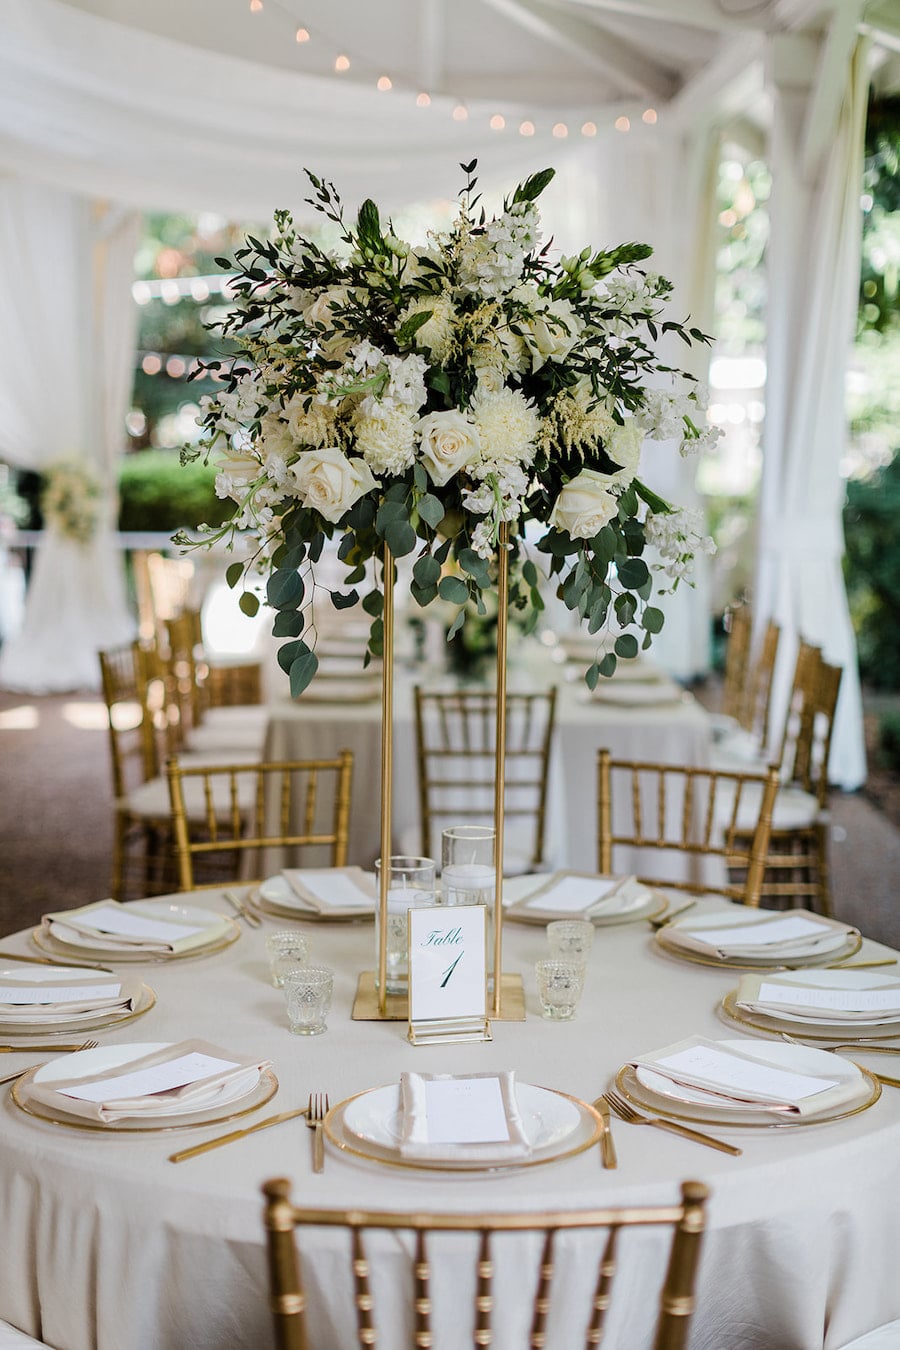 Ivory Wedding with Greenery and Candles at Franklin, TN Venue